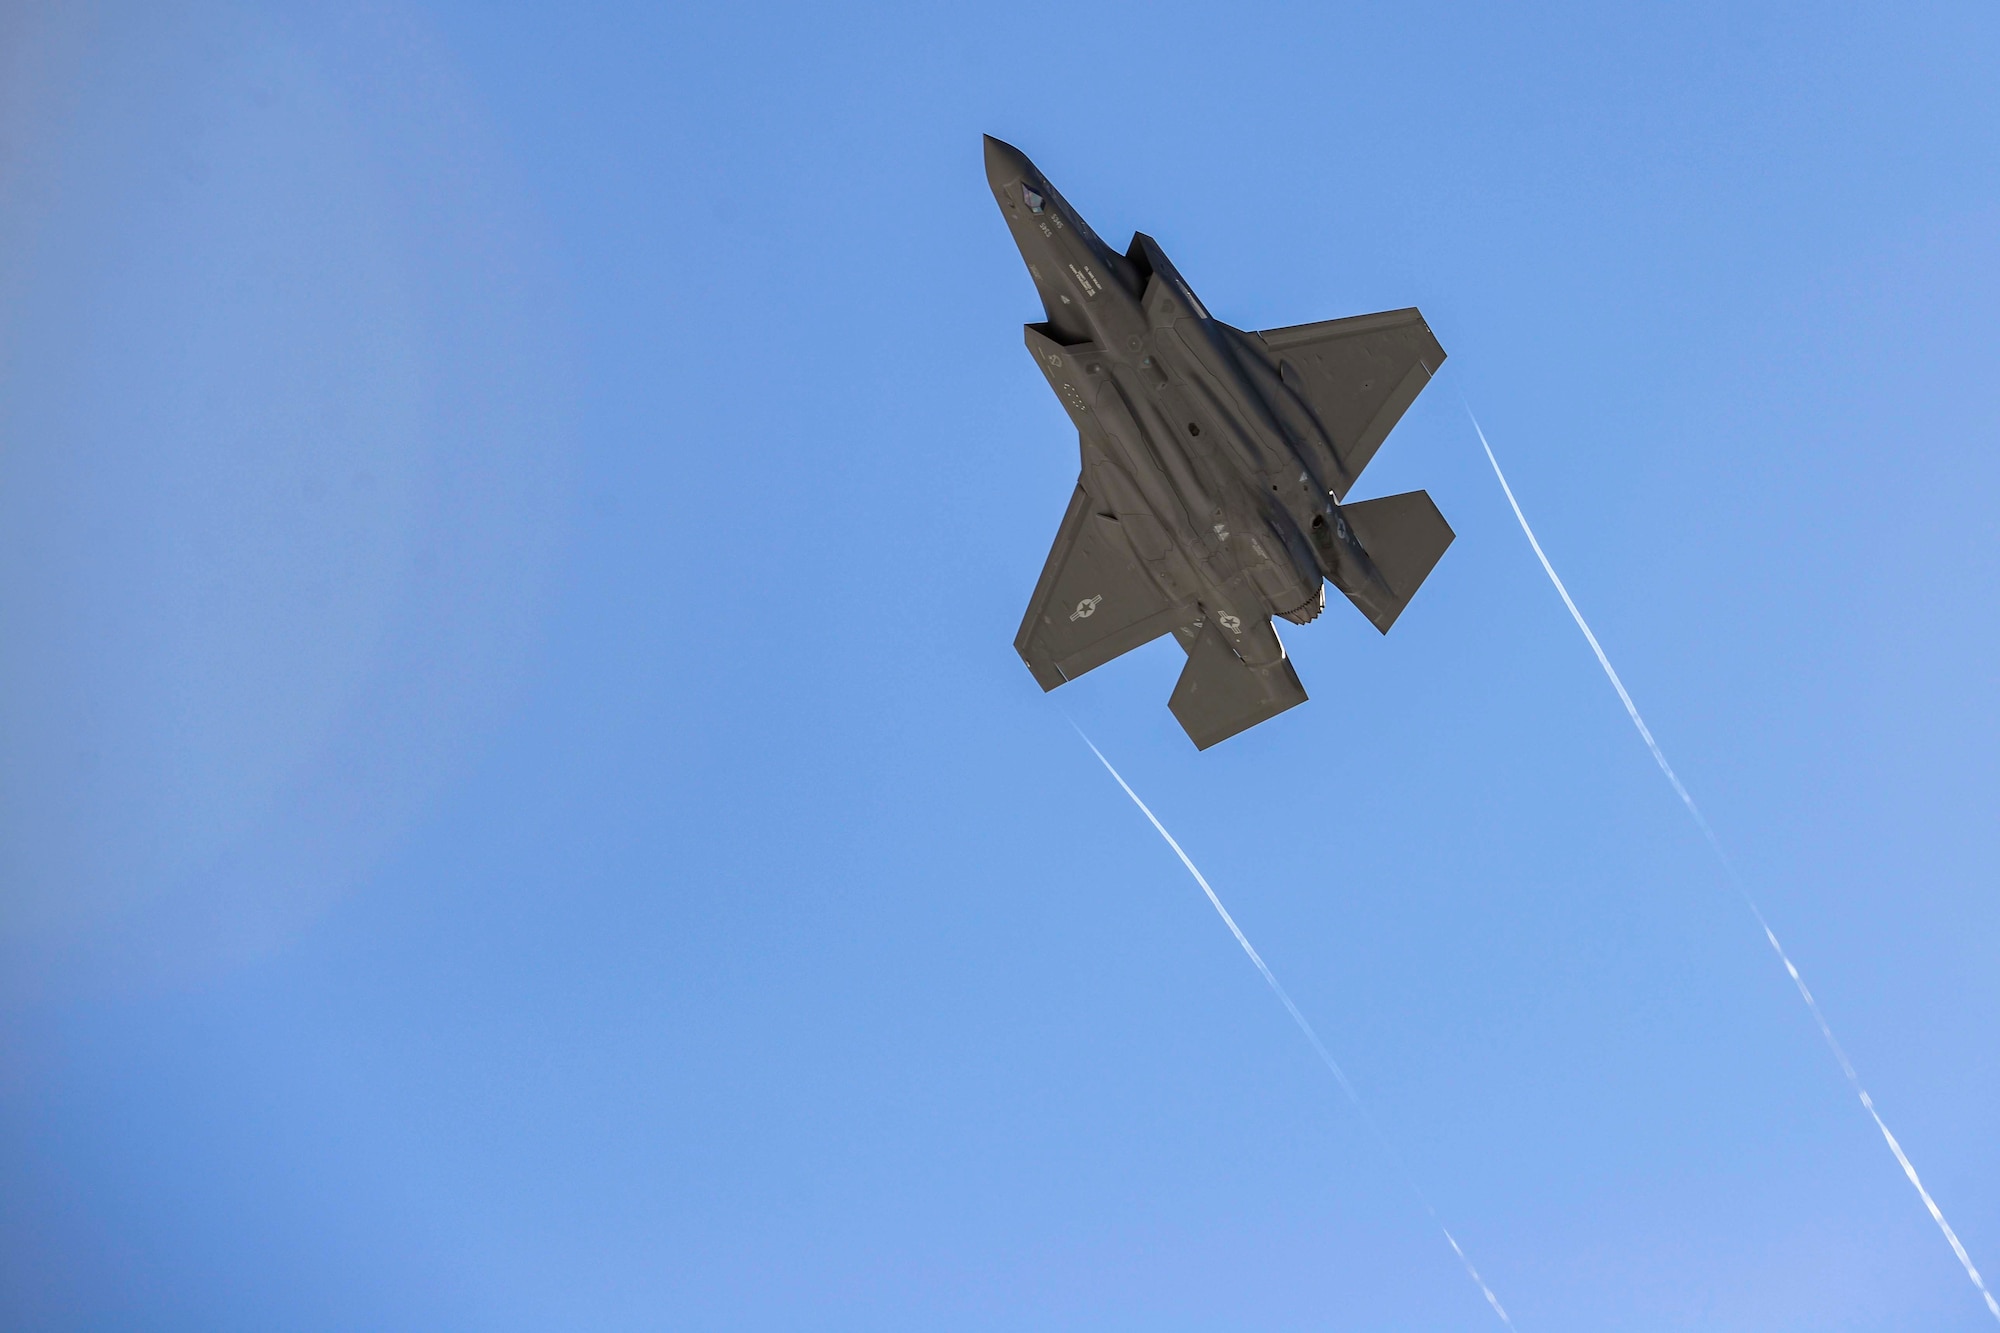 An F-35A Lightning II assigned to the 354th Fighter Wing flies over Eielson Air Force Base, Alaska, April 7, 2021. During AG 21-2, Airmen will be practicing Agile Combat Employment capabilities which will allow them to work dislocated operations and still be able to generate F-35A Lightning II aircraft. (U.S Air Force photo by Staff Sgt. Kaylee Dubois)